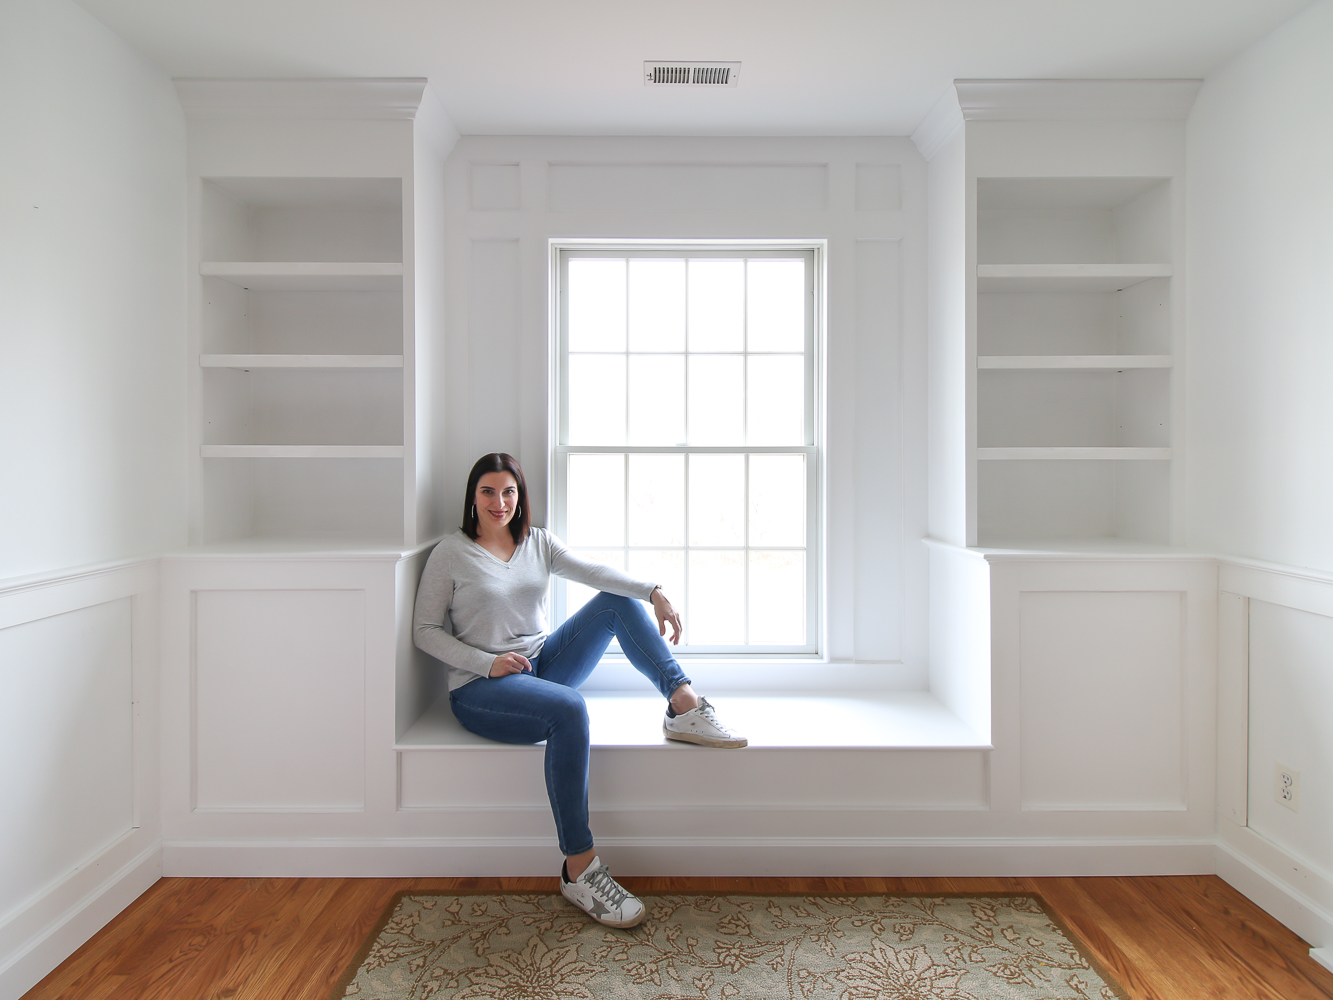 Builtin Window Bench and Bookcases